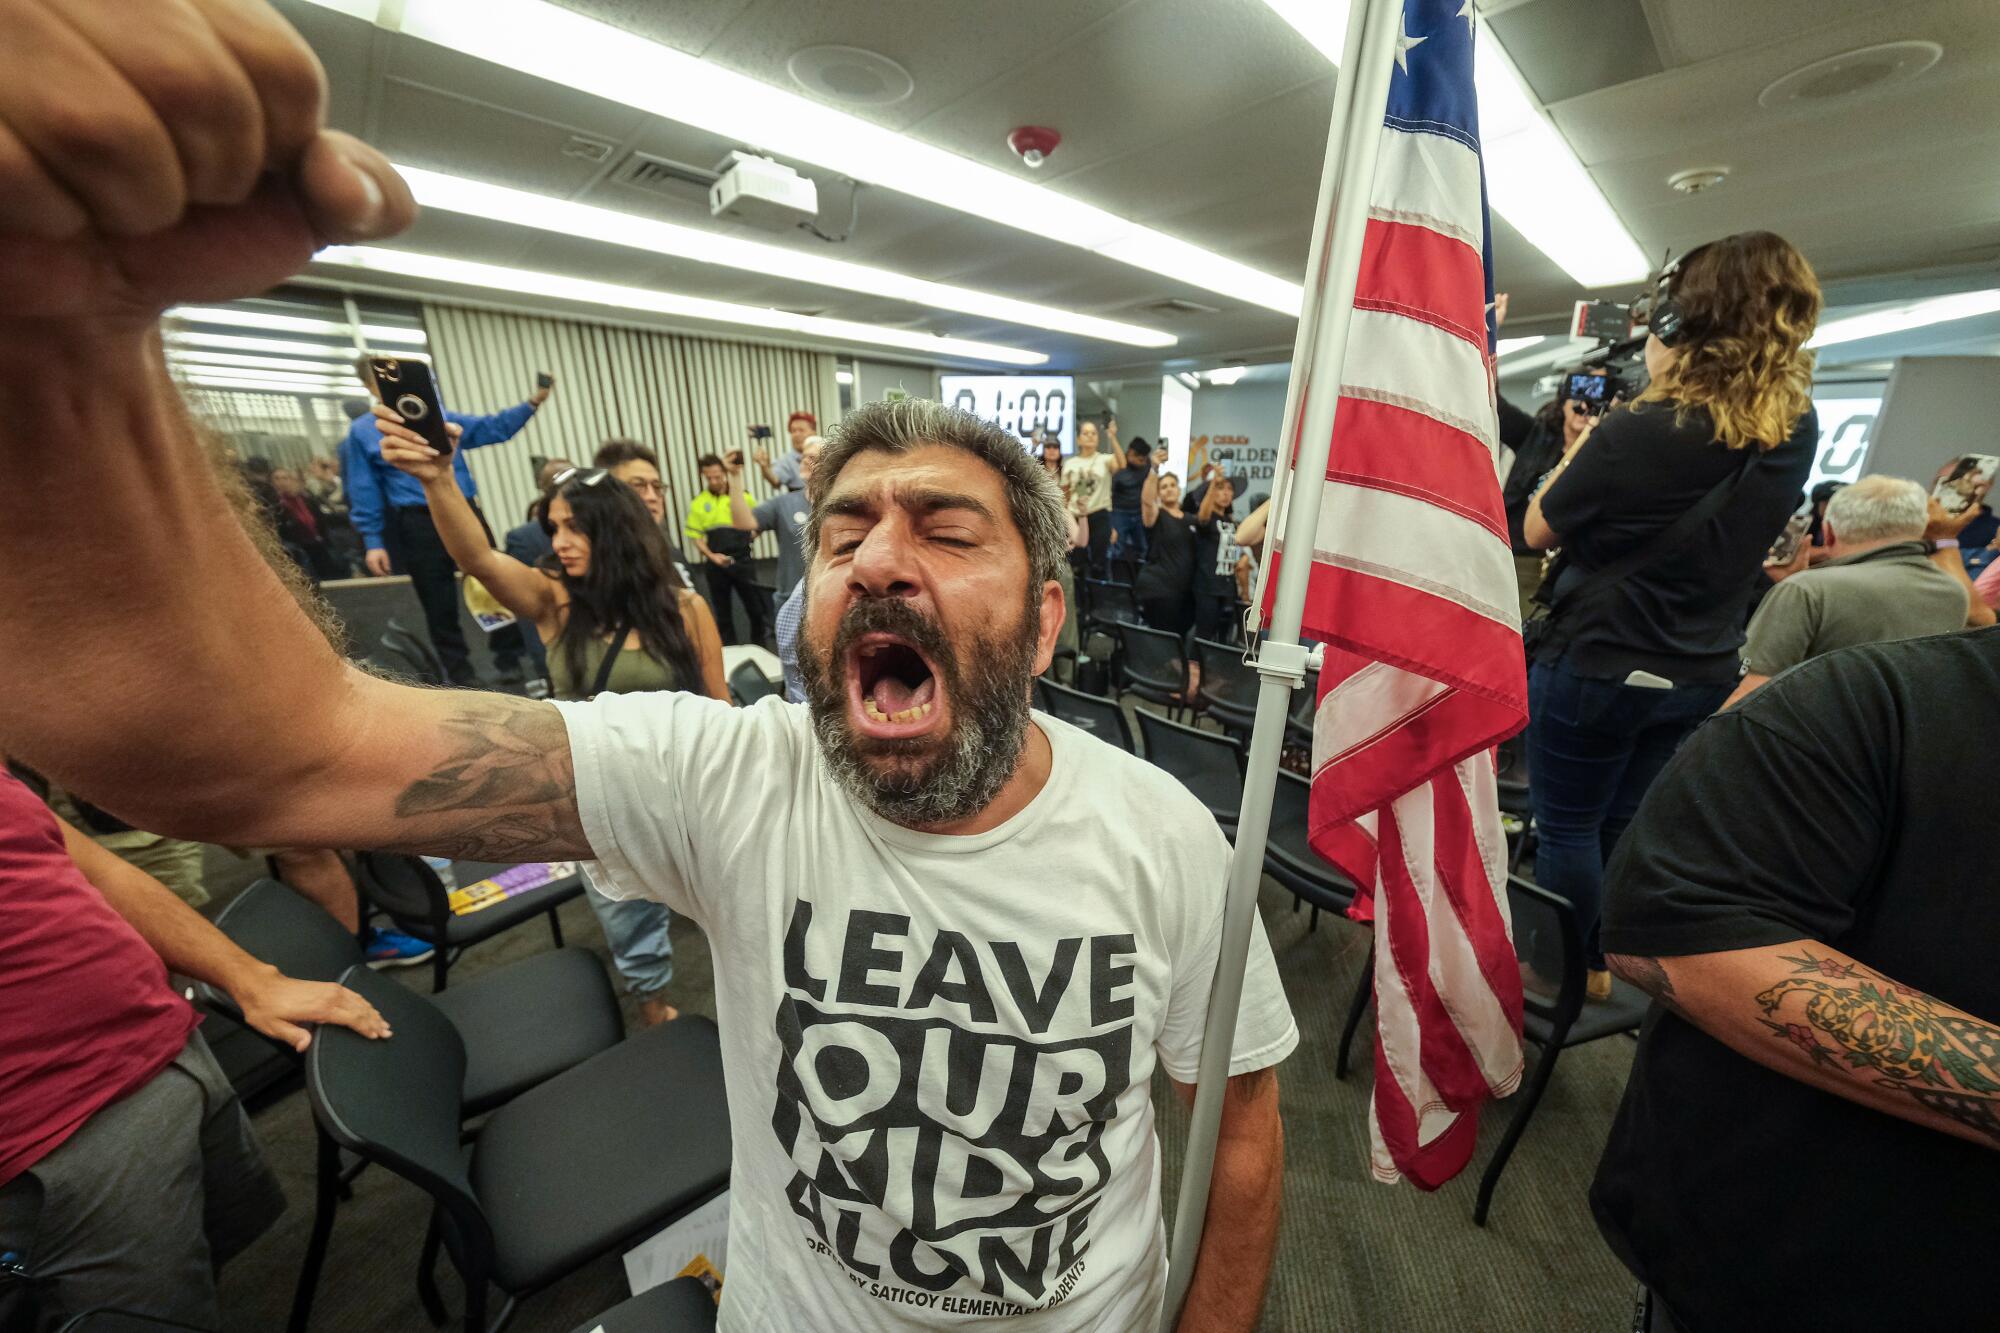 A man wearing a "Leave our kids alone" T-shirt raises a clenched fist and shouts in a crowded meeting room.